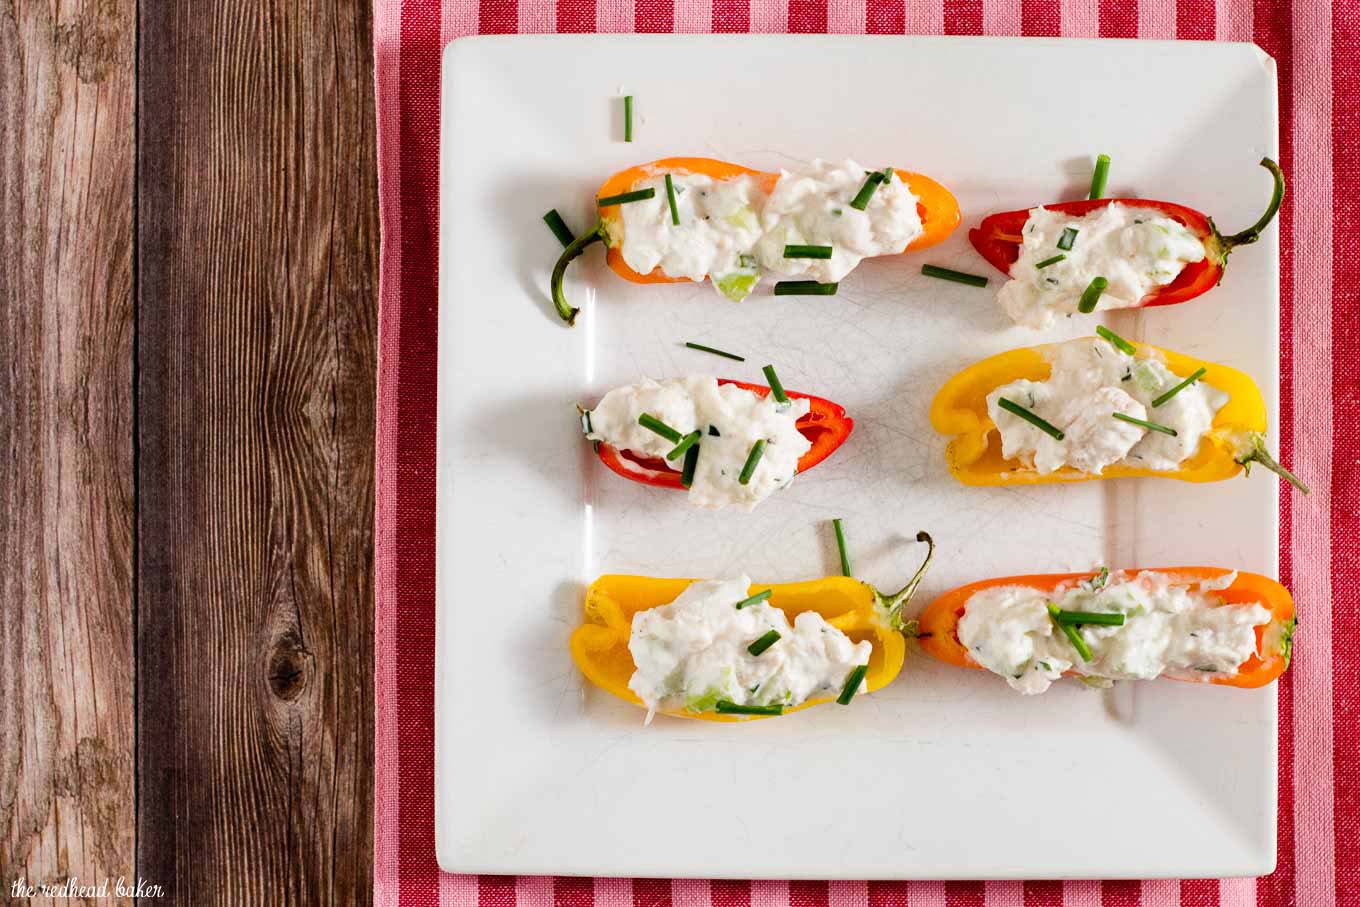 Need a last-minute Valentine's Day appetizer? Try these crab salad stuffed mini peppers! They have complex flavor and don't require any cooking!